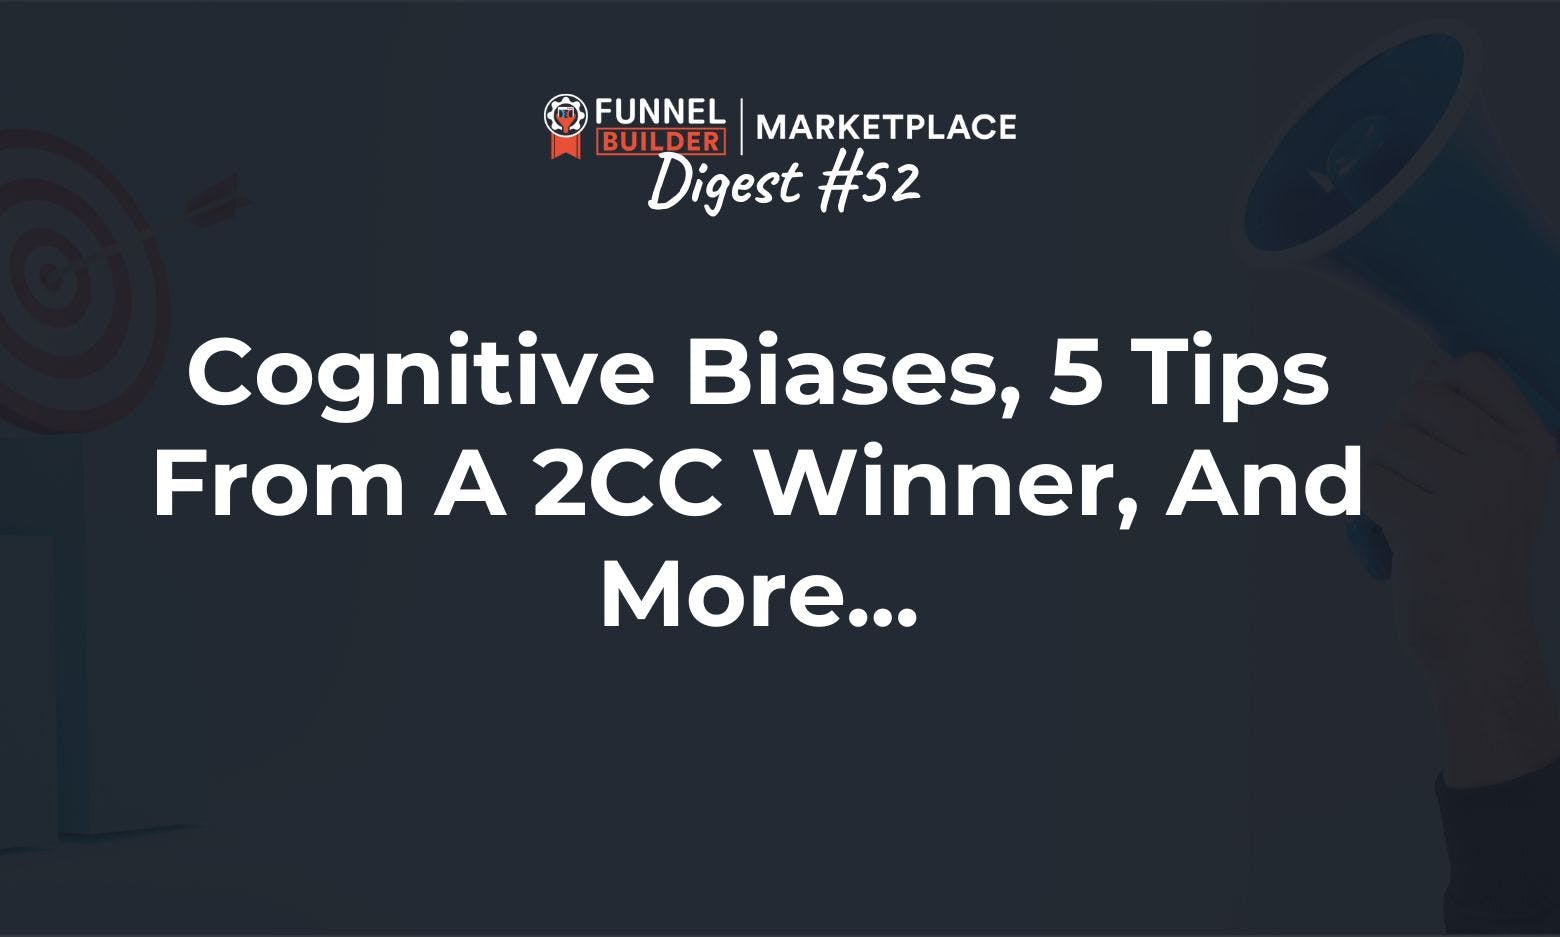 FBM Digest #52: Cognitive biases, 5 tips from a 2CC winner, and more...